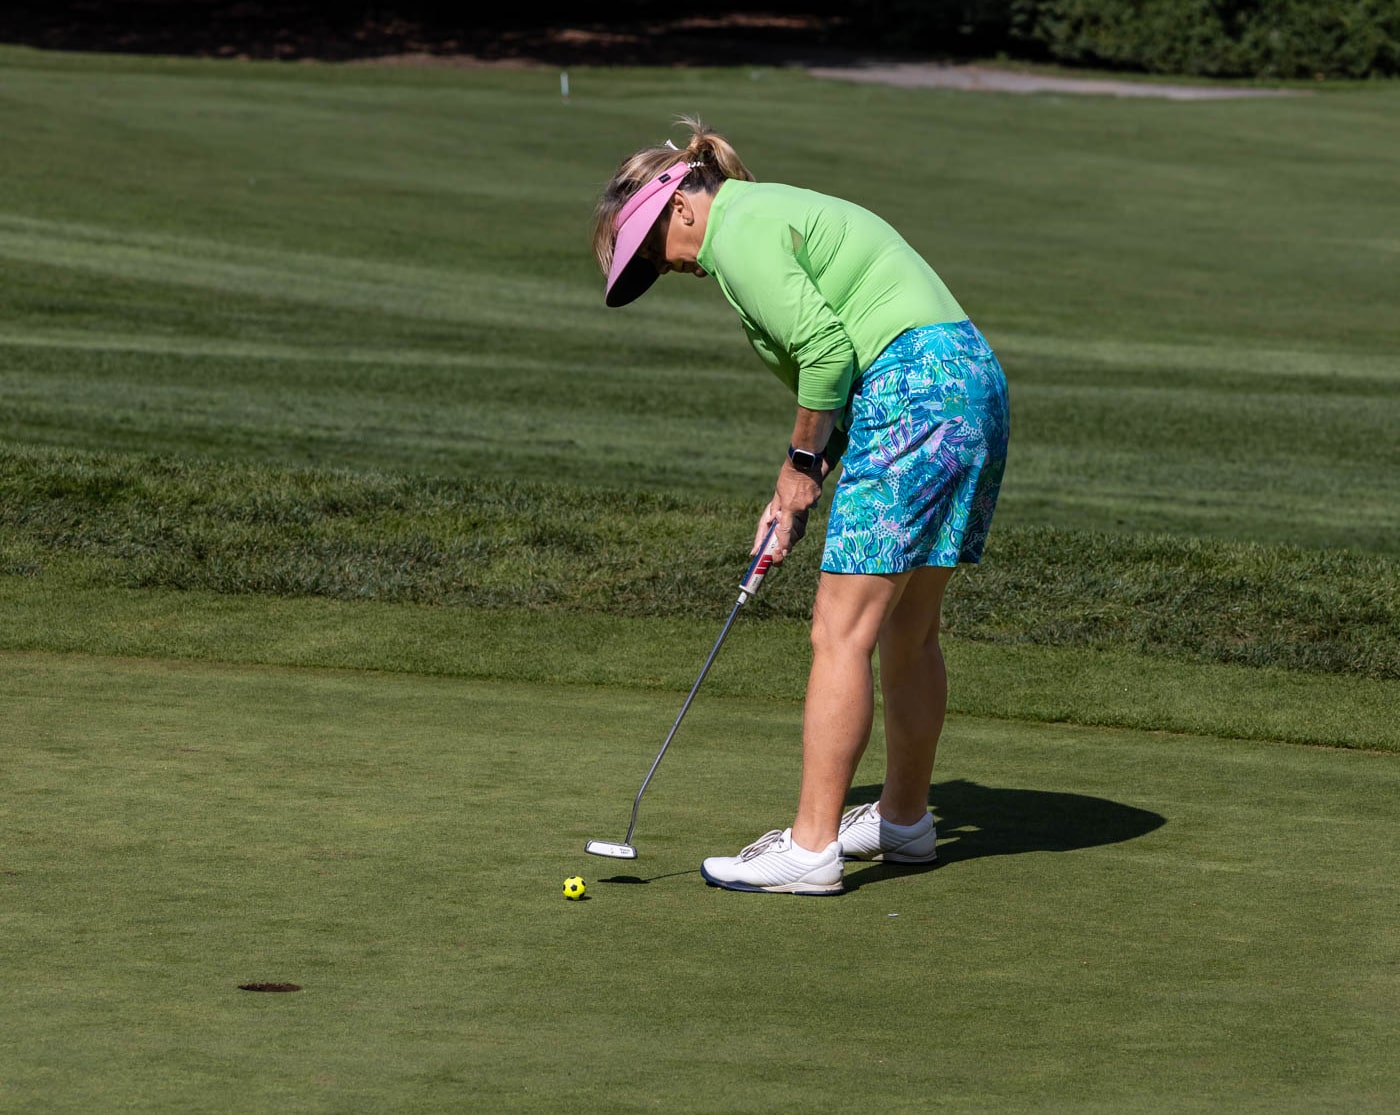 Country-Club-Of-New-Bedford FB-2023-Womens-FB-Gallery August-2023-Country-Club-Of-New-Bedford-FB-2023-Womens-FB-Gallery August-2023-Womens-FB-Gallery-Tuesday-Photos-Image-13